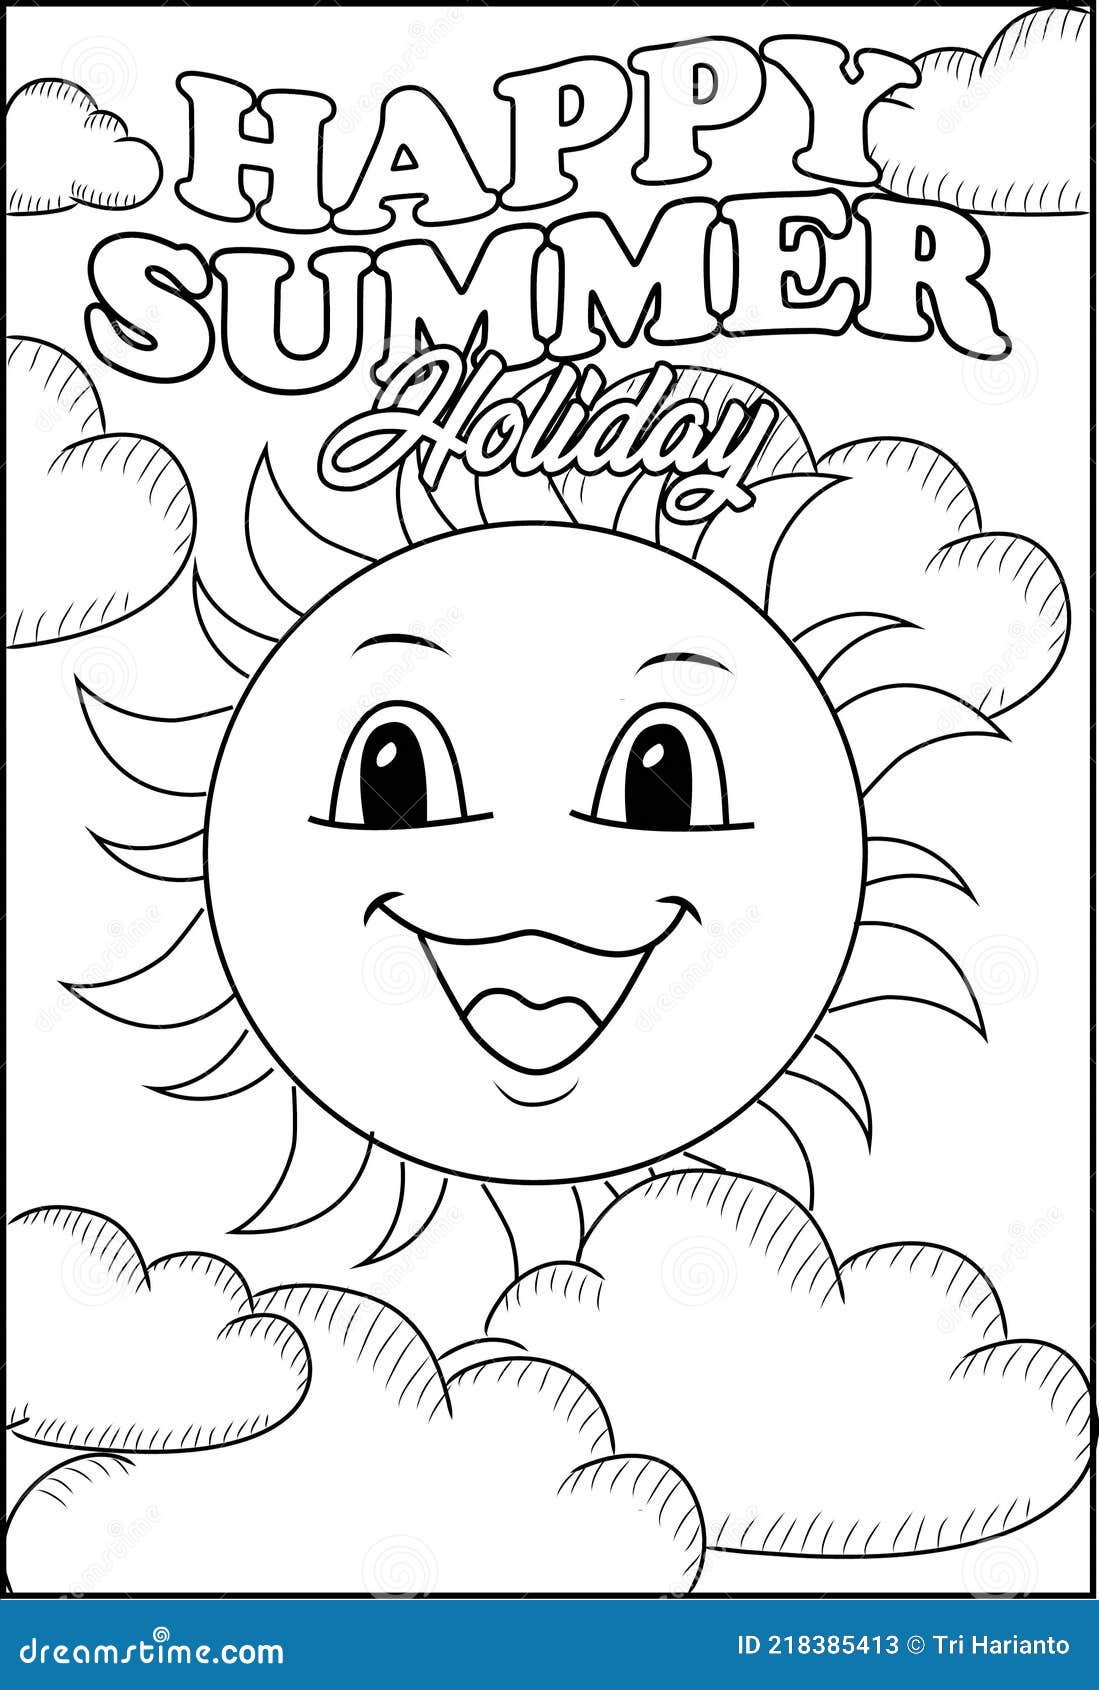 The sun happy summer holiday coloring page stock illustration